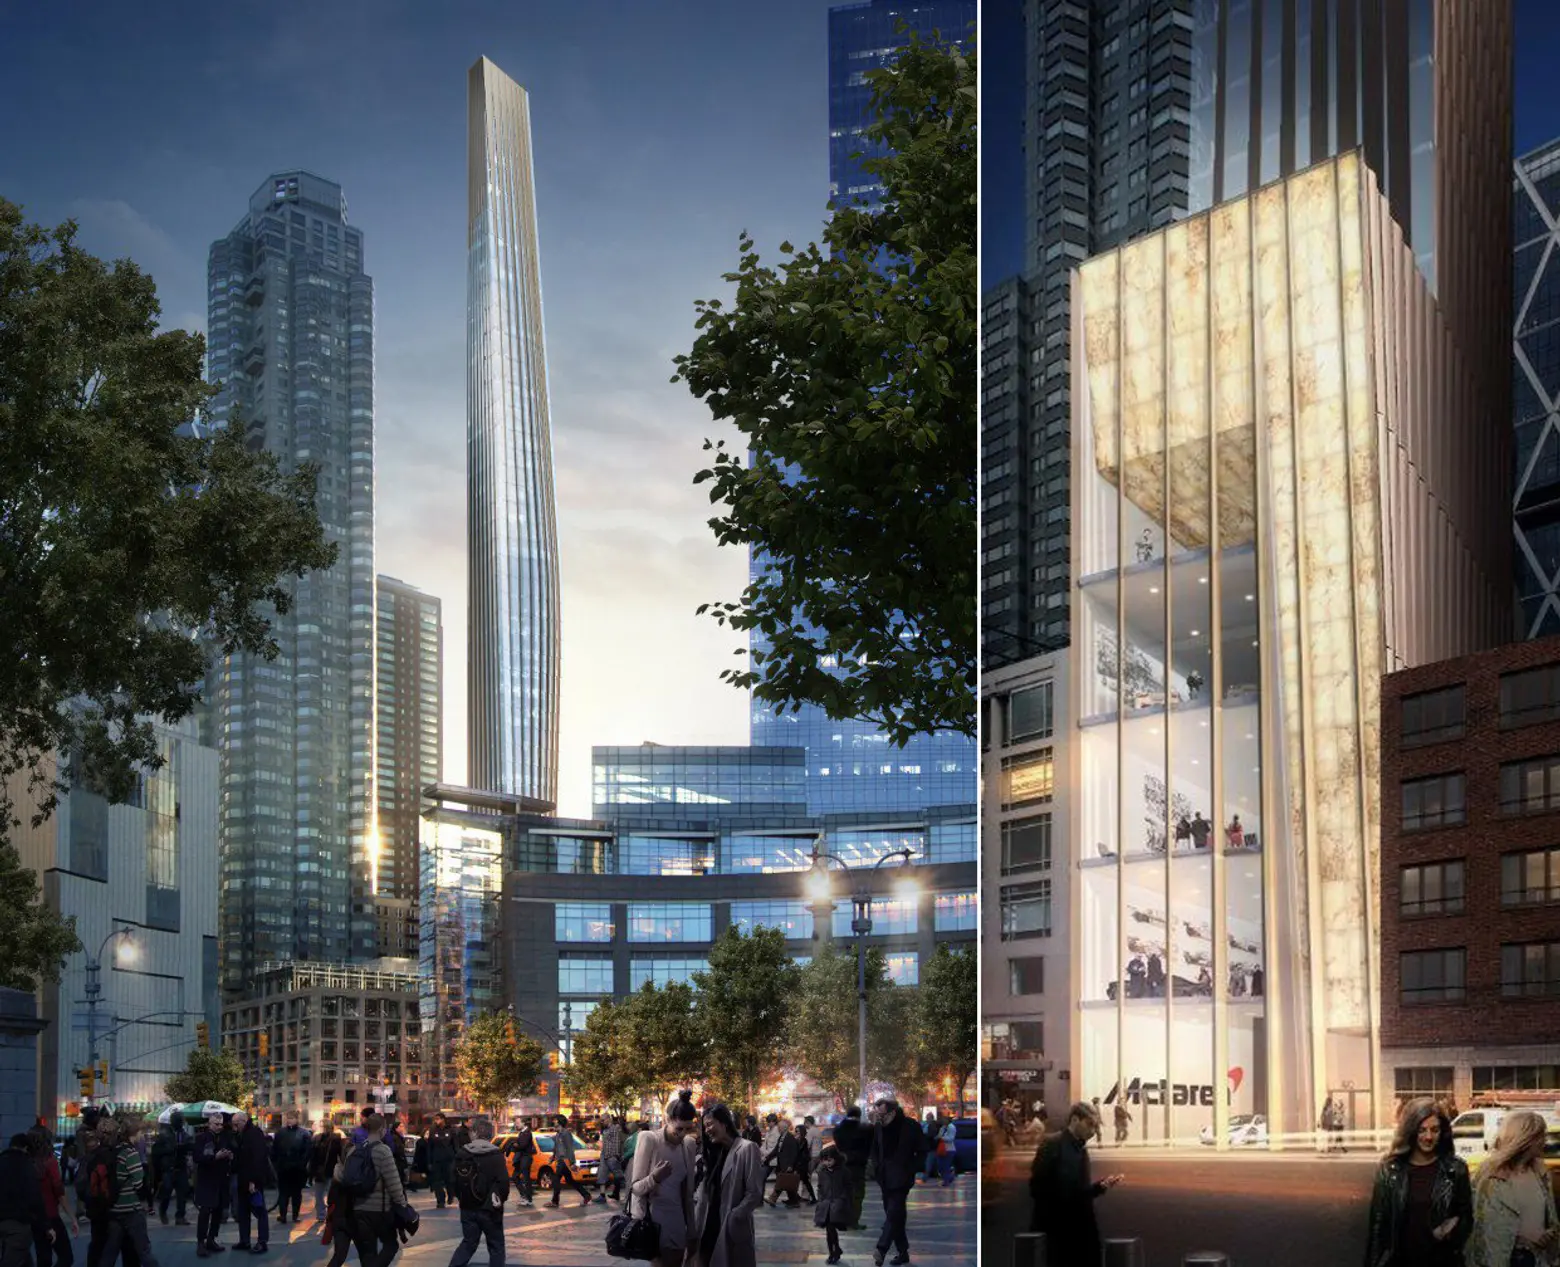 See How 6 Columbus Circle Could Change the Central Park Skyline